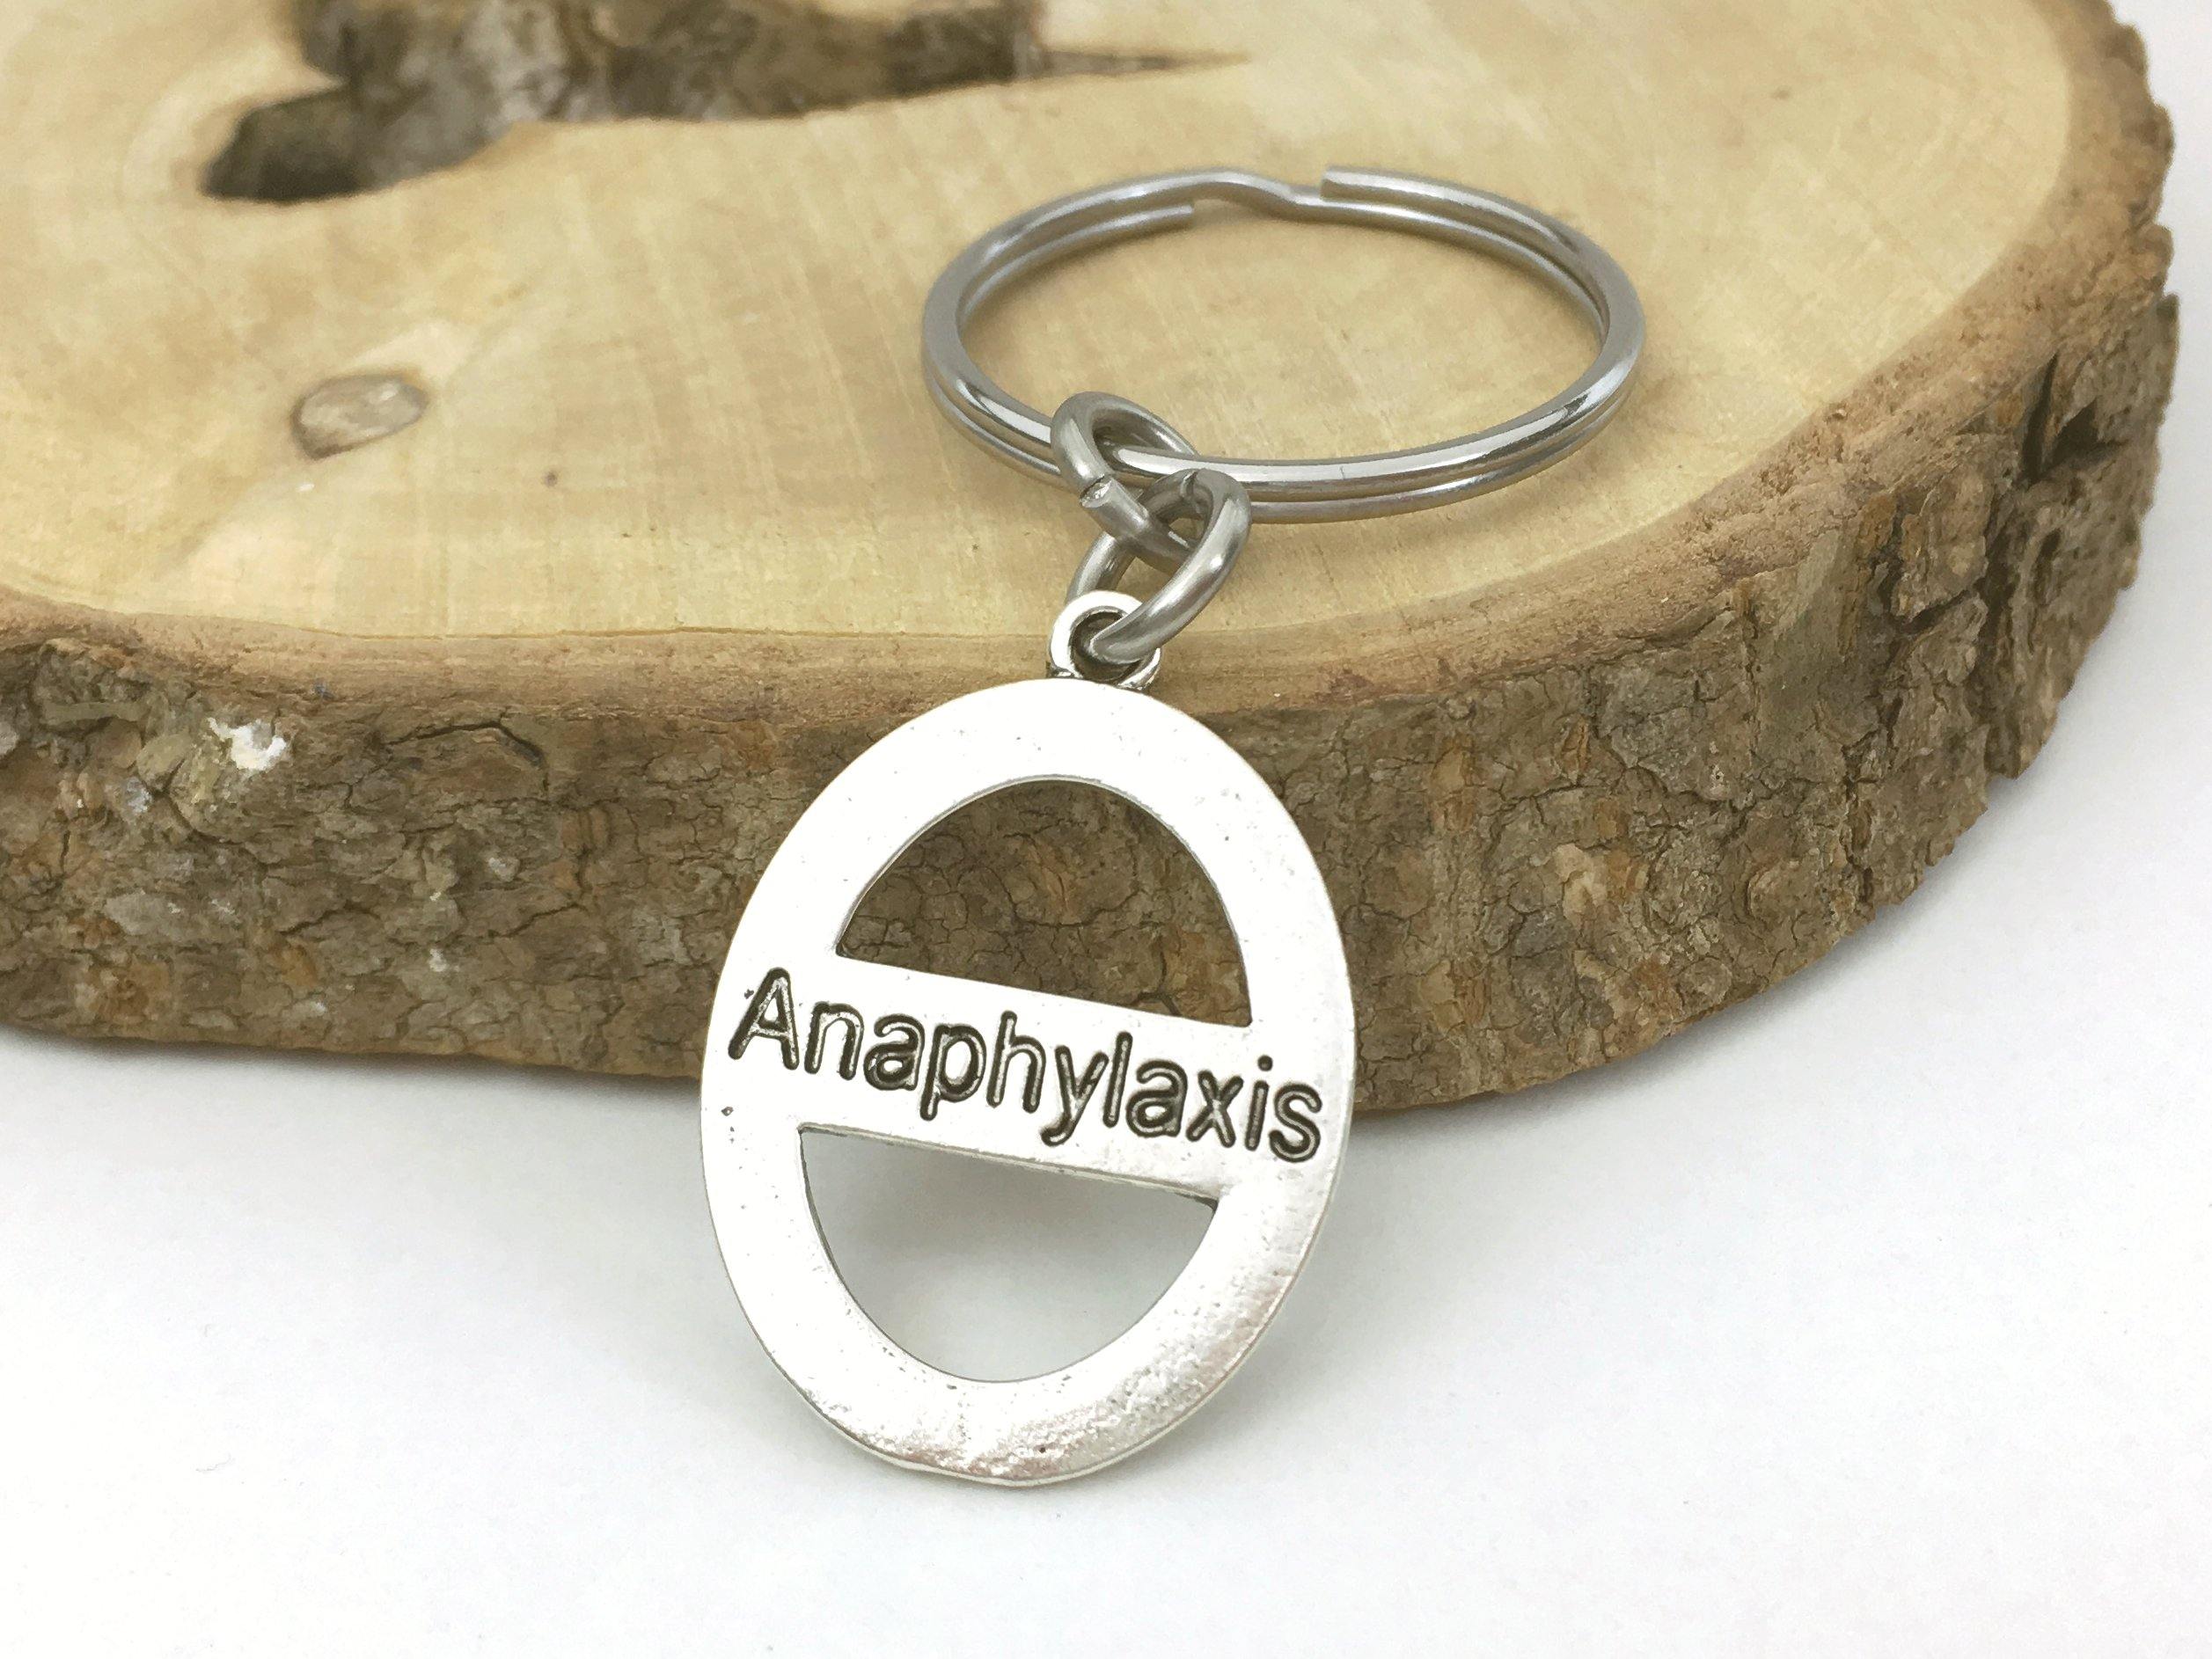 Medical alert jewellery for Allergies or Anaphylaxis